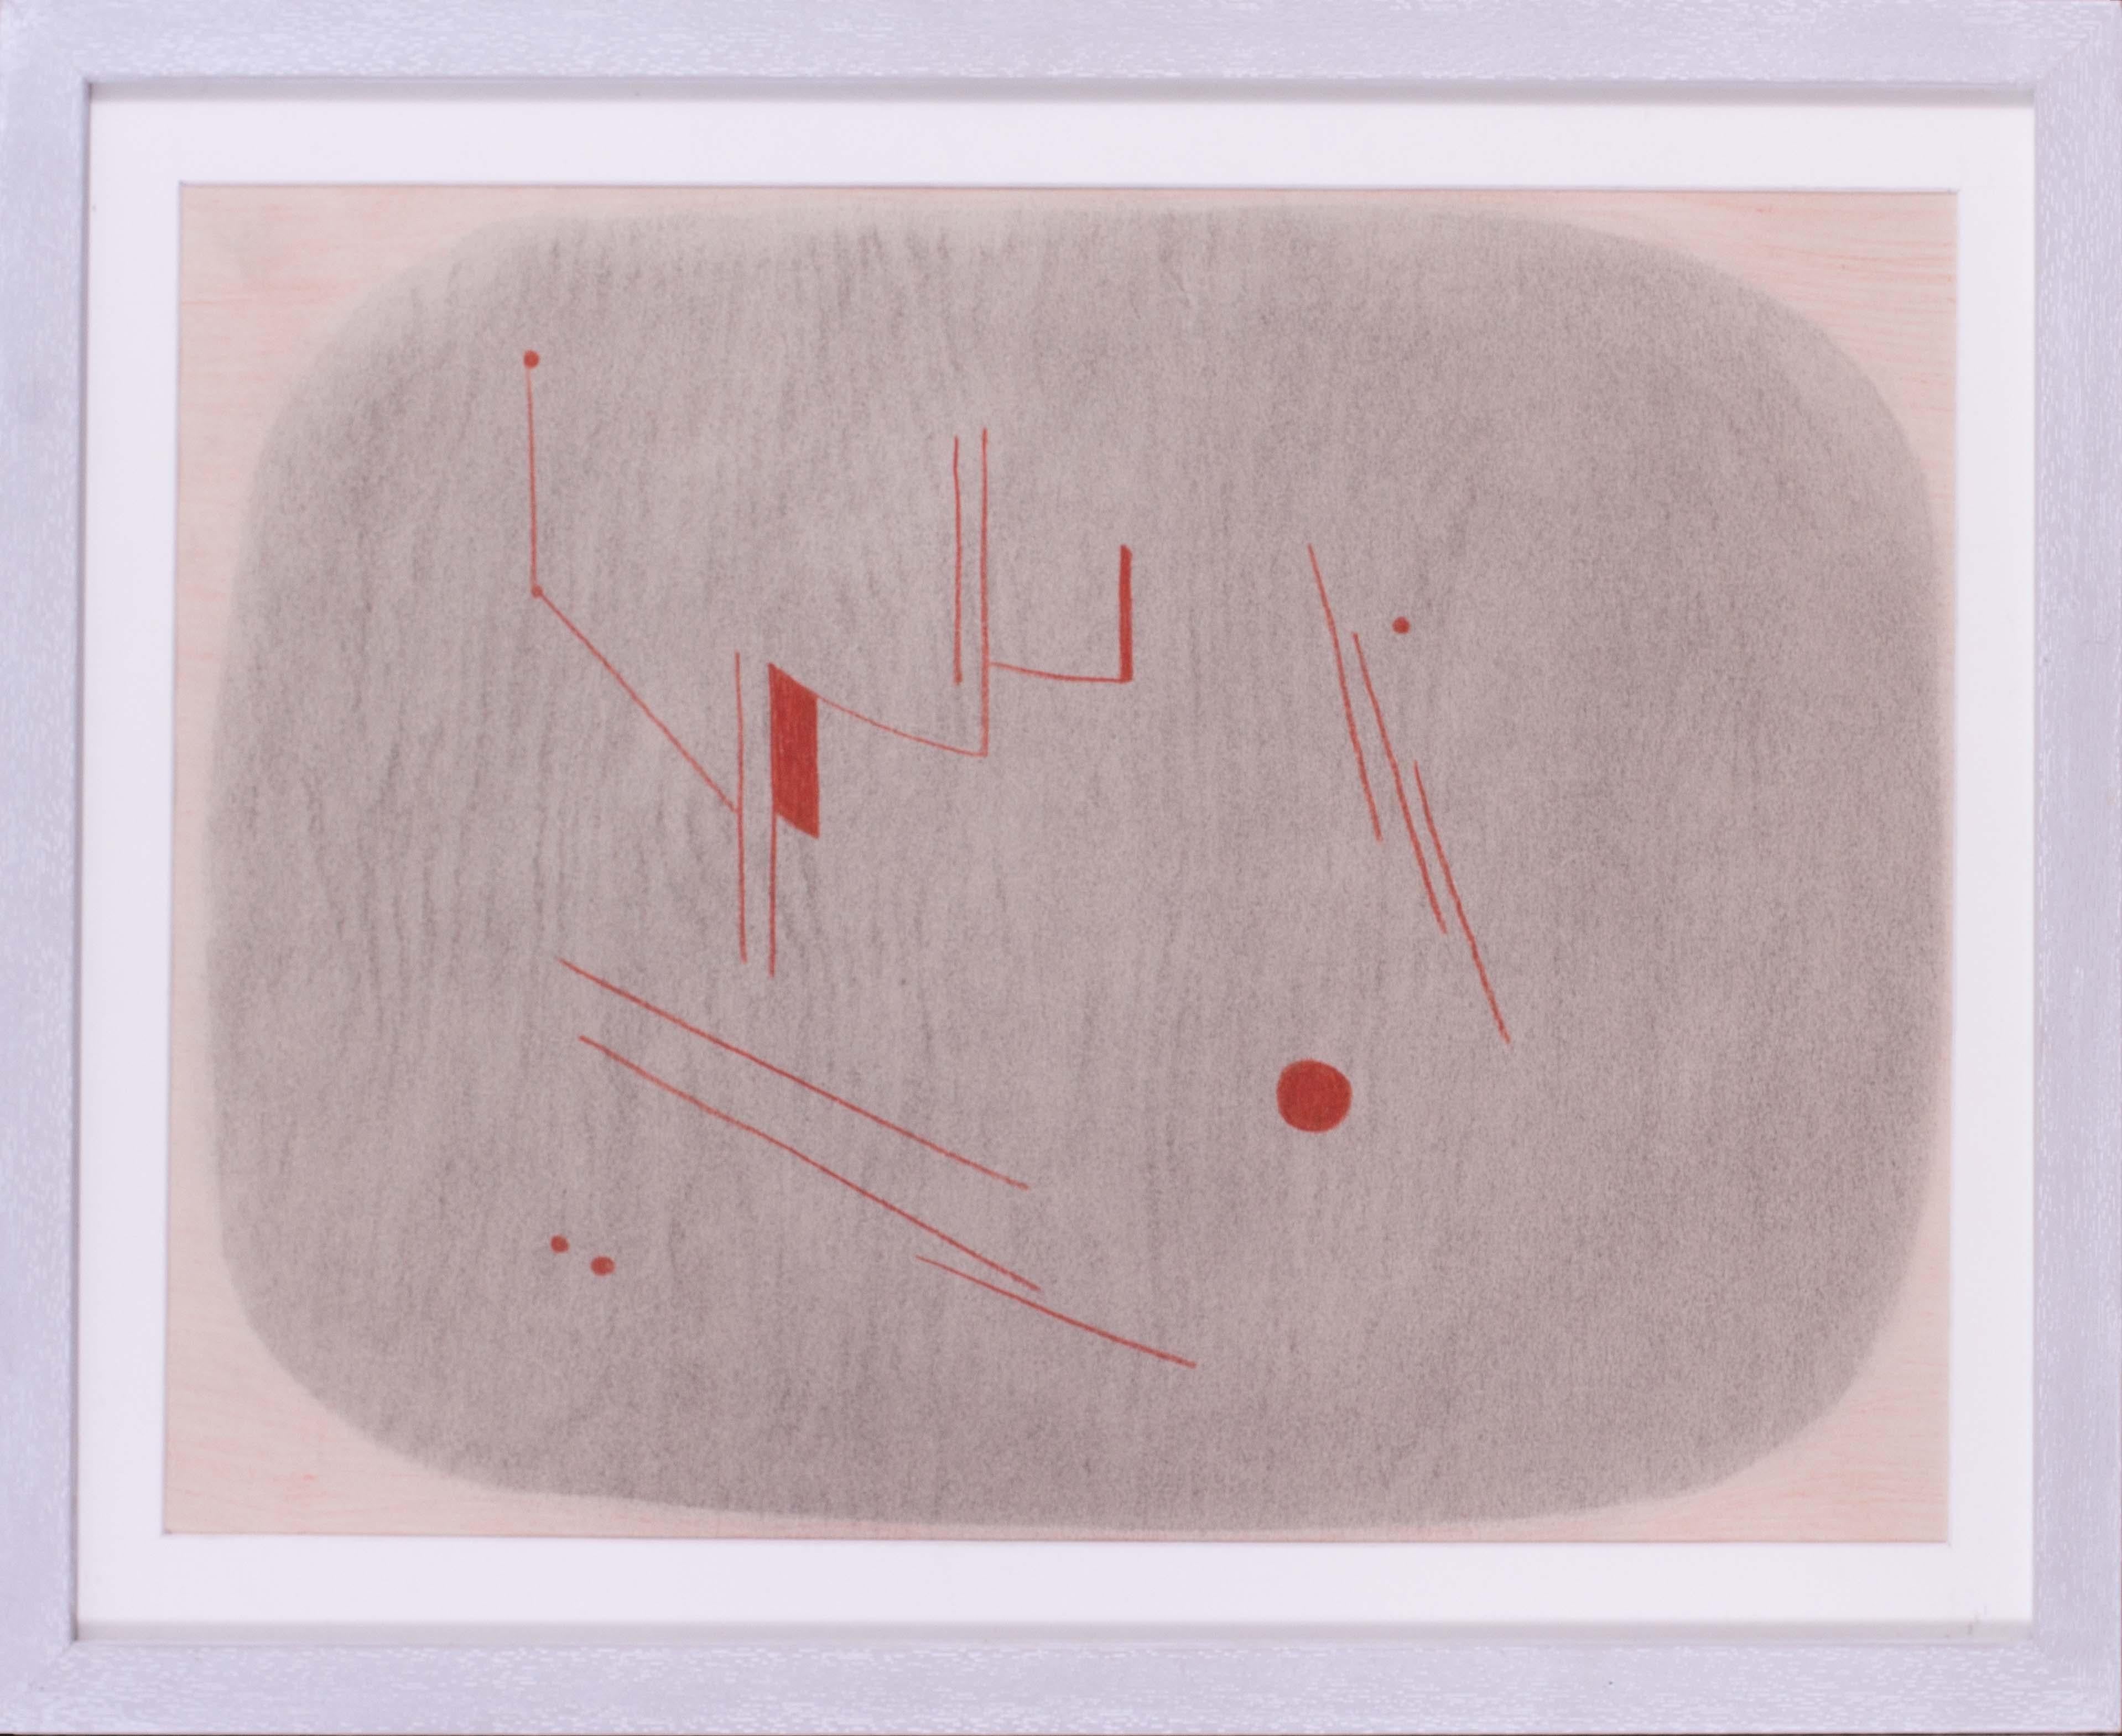 Arthur Berridge (British, 1902-1957)
Abstract with reds, circa 1950
Crayon
13.1/4 x 17.1/2 in. (33.7 x 44.4 cm.)
Provenance: David Lay, Penzance 

Born in Leicester in 1902, Berridge attended Goldsmith's College in London, where he graduated in